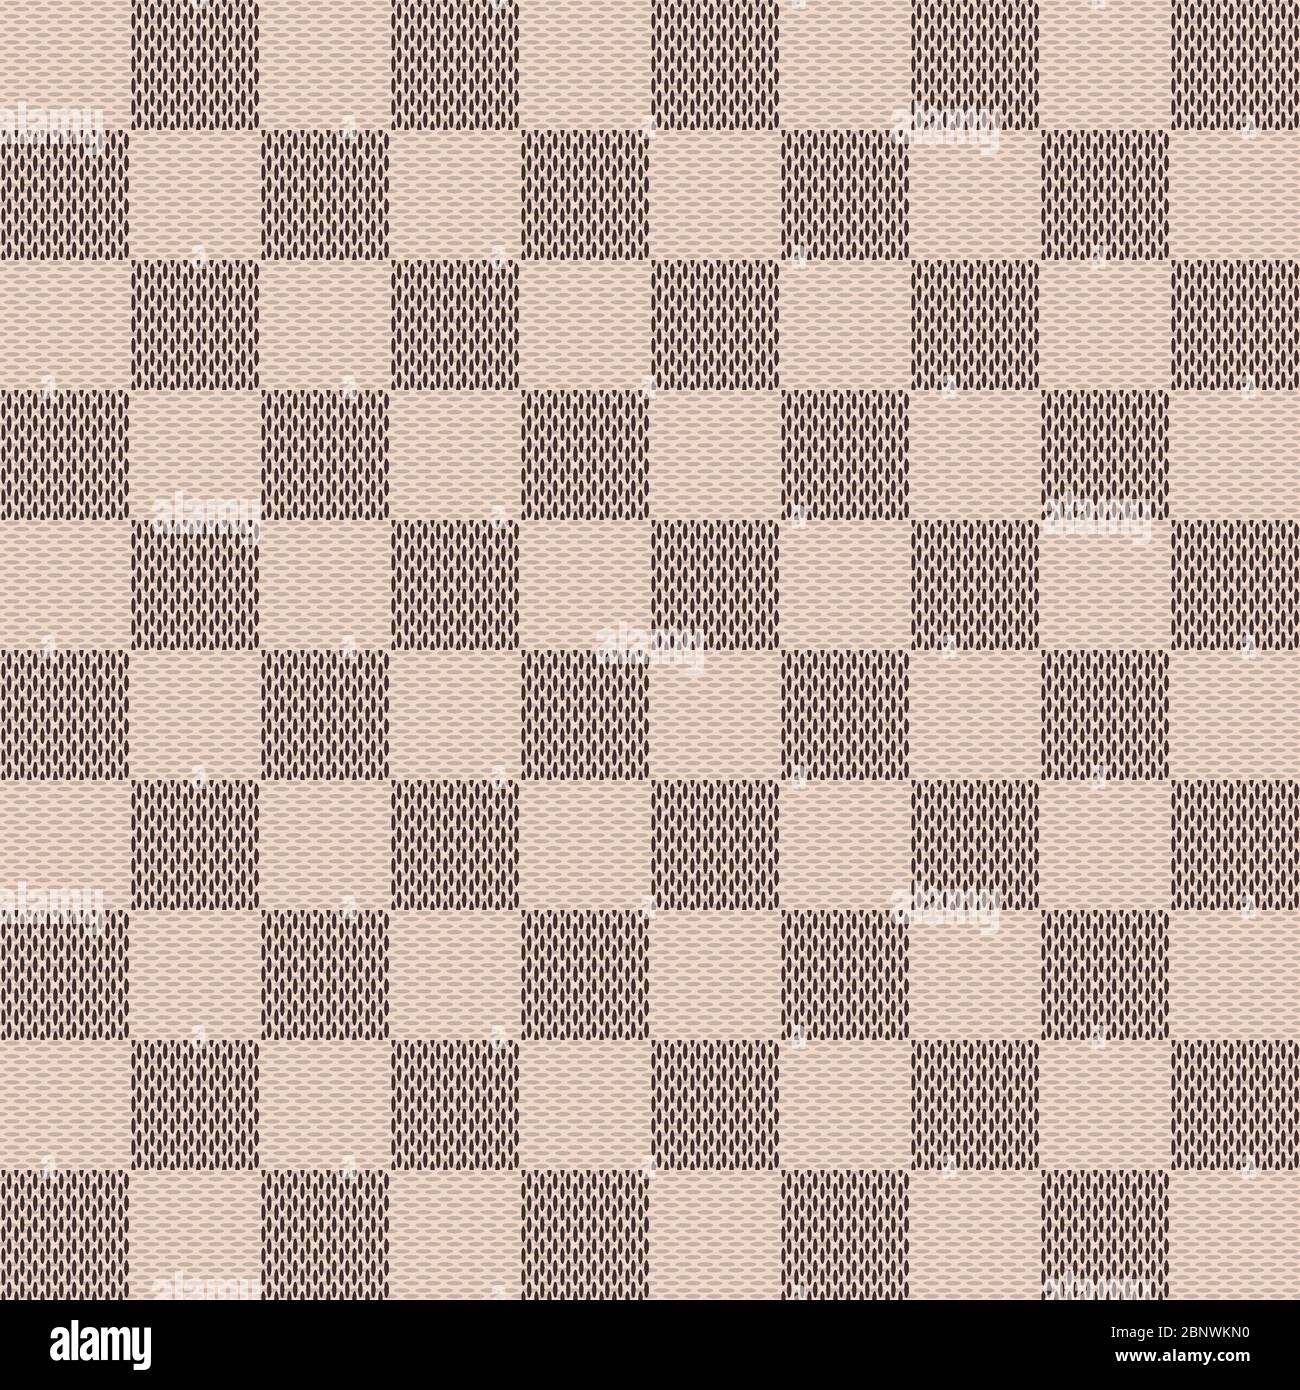 Seamless chessboard pattern. Contrast and bright mosaic decoration